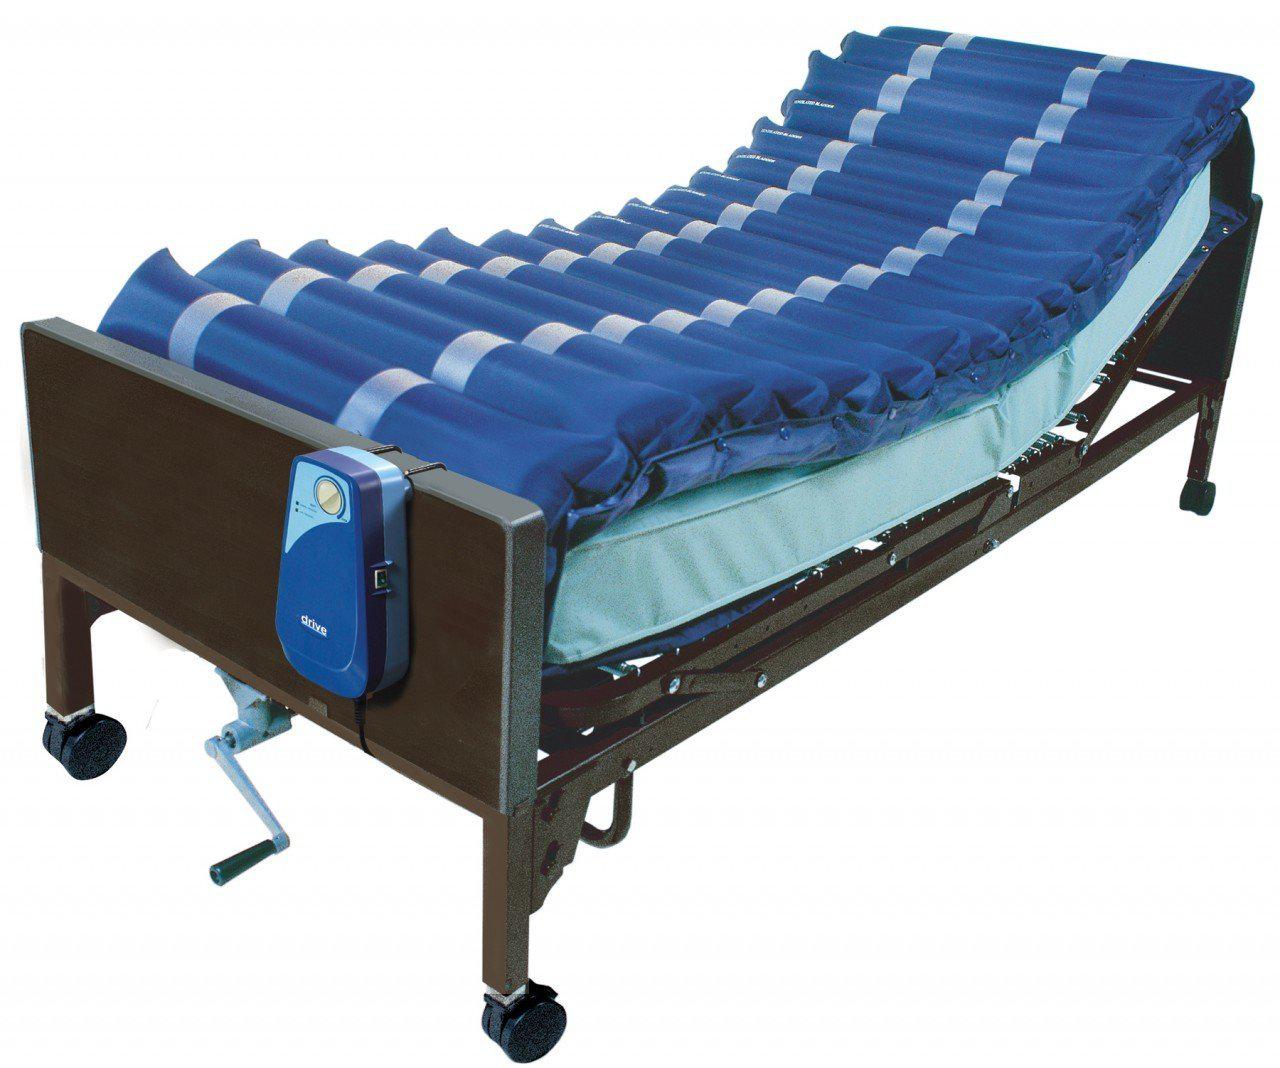 5" Med Aire Low Air Loss Mattress Overlay System with APP  14025n